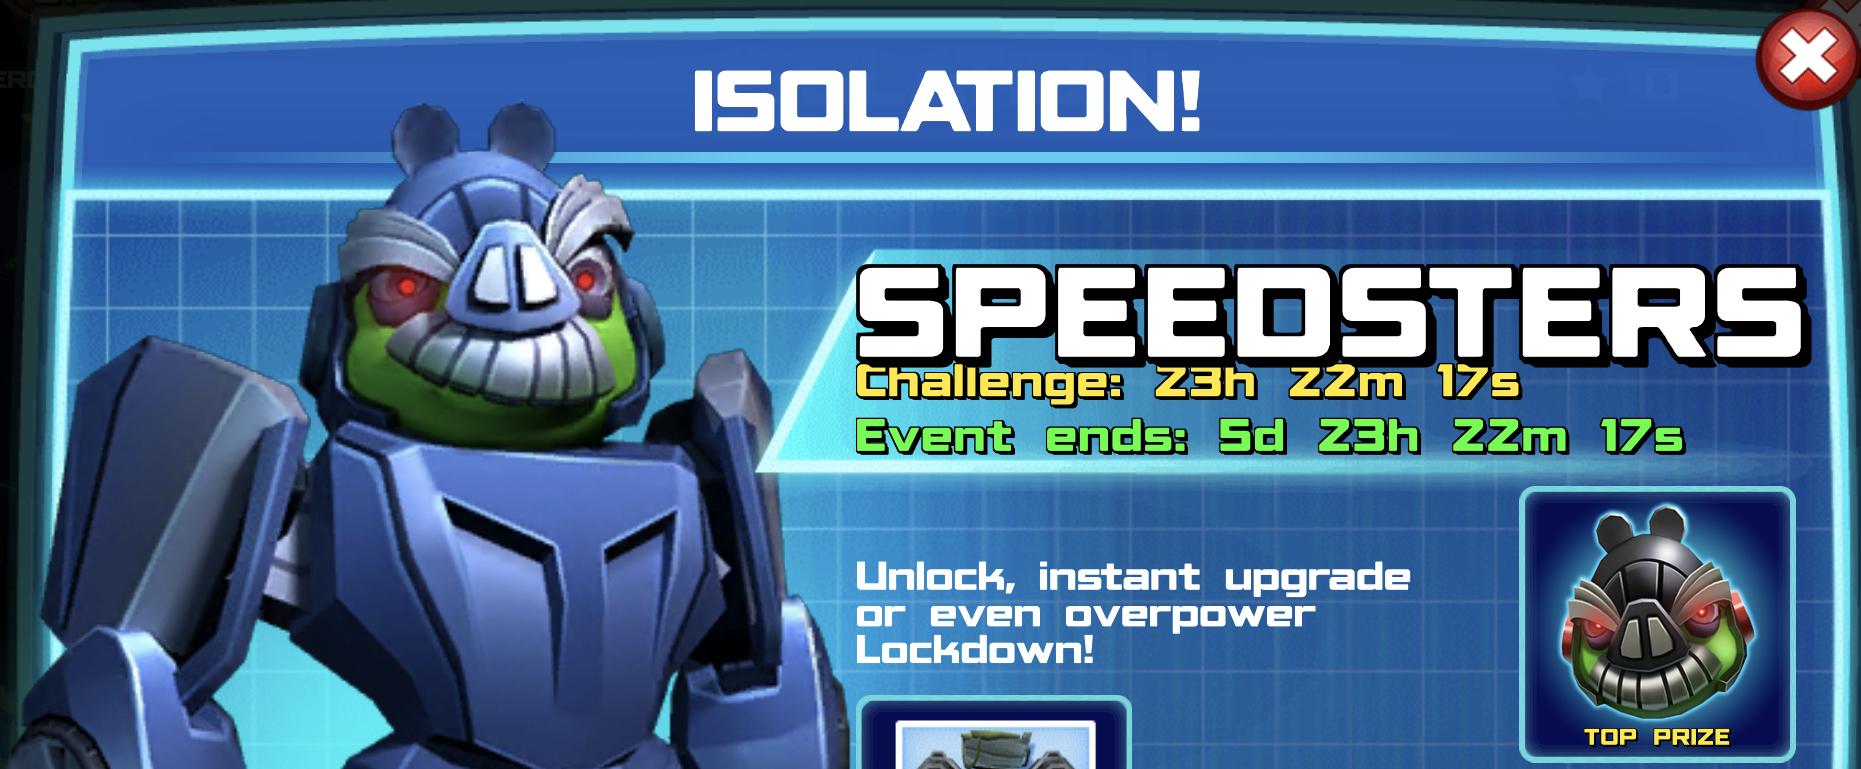 The event banner for Isolation!